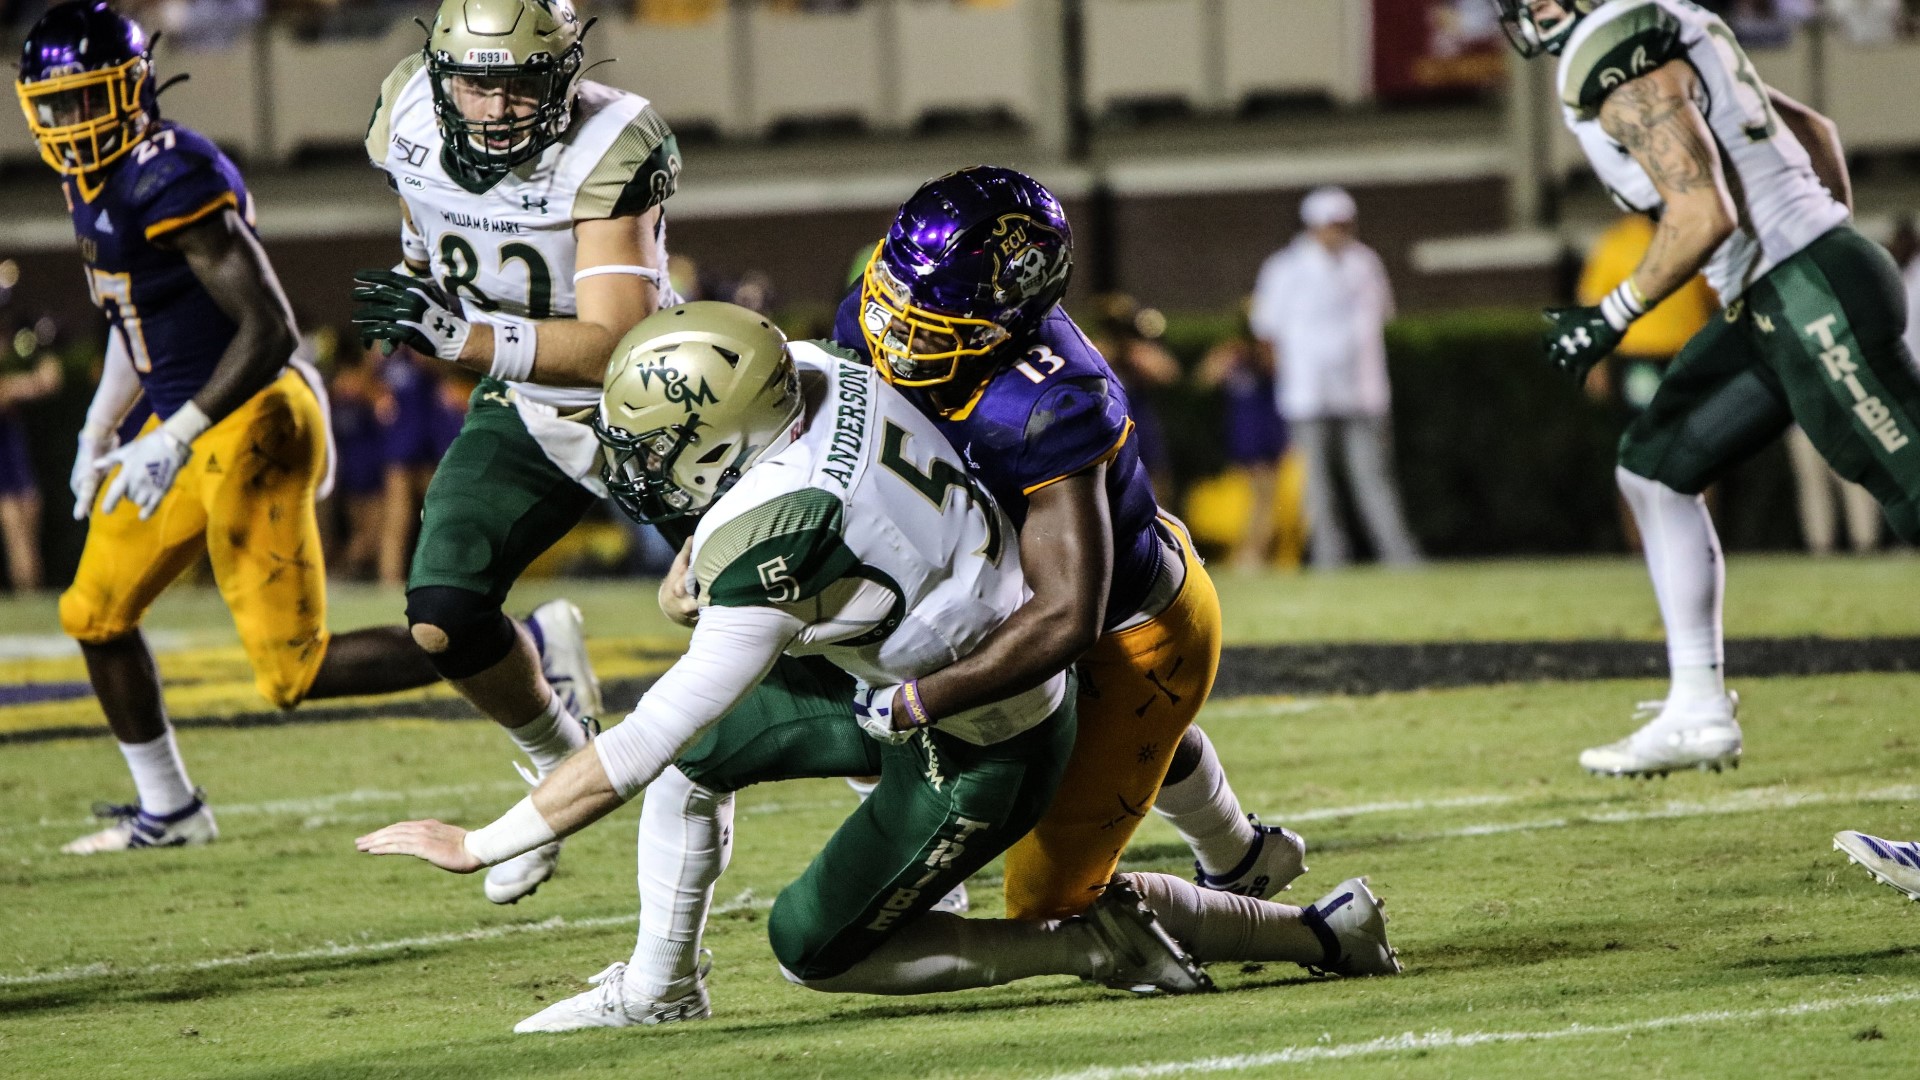 ECU had seven tackles for losses and limited William & Mary (2-2) to 260 total yards.